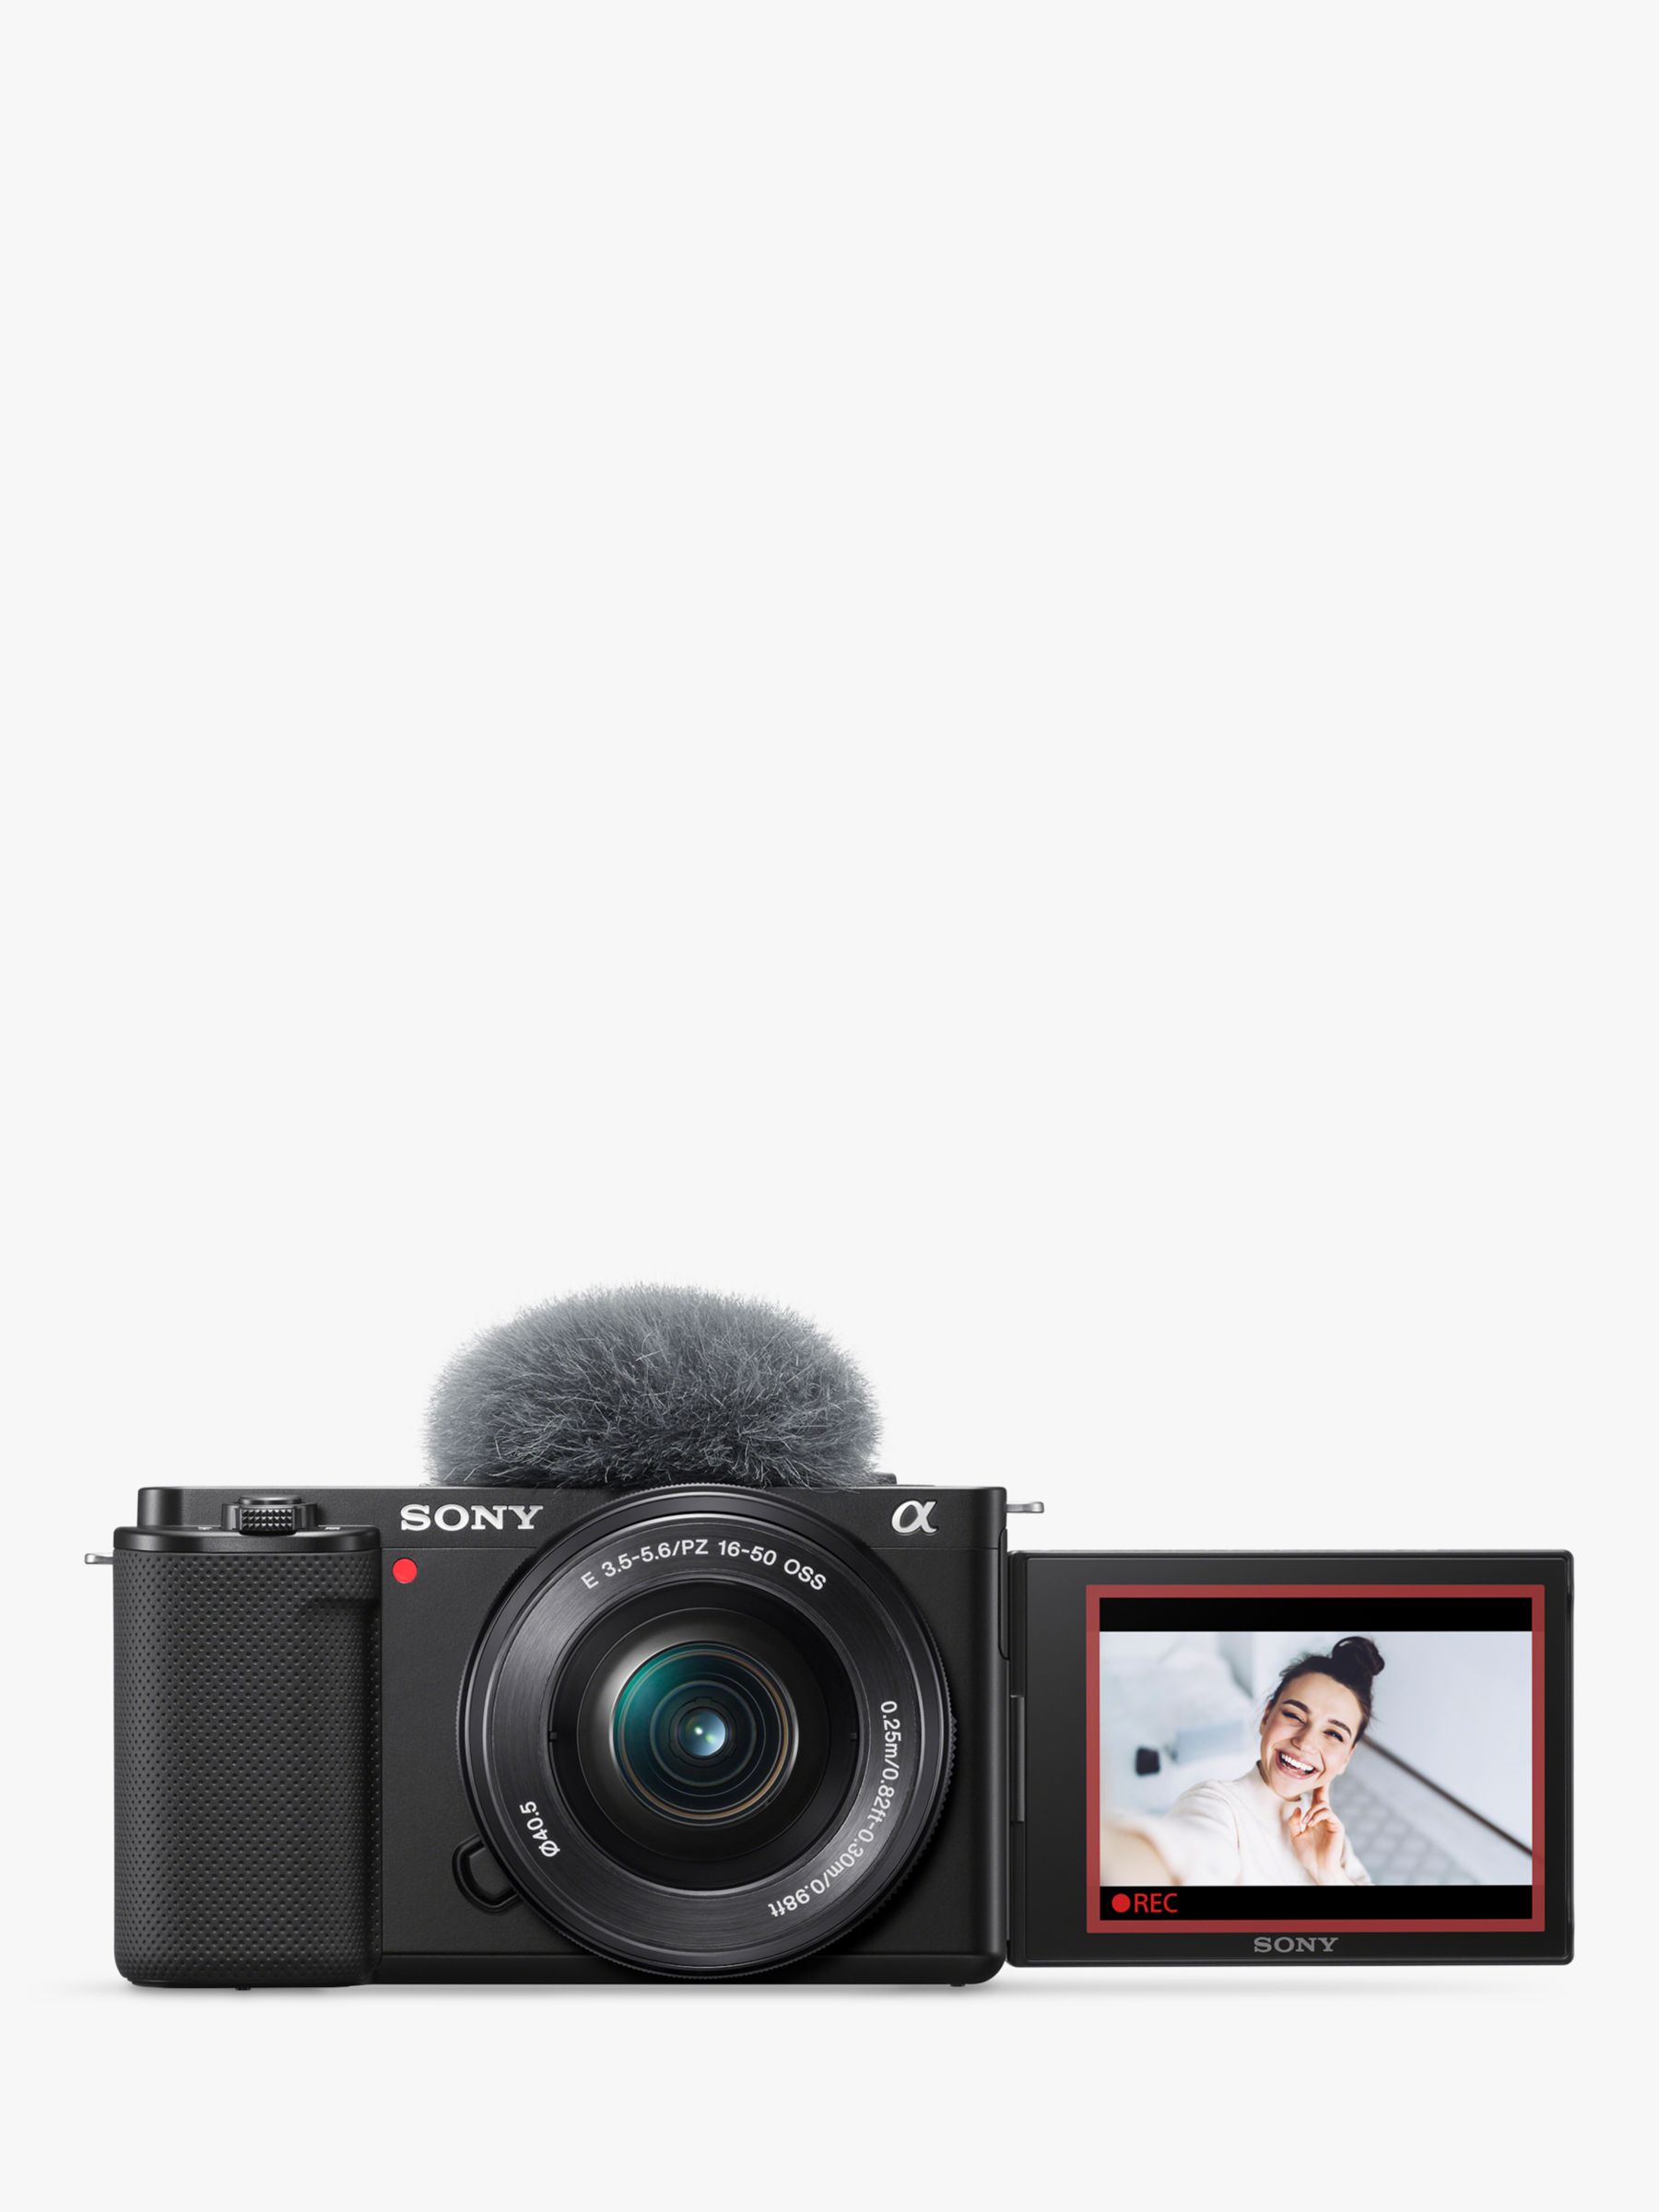 Camera Setup Guide For Vlogging With The Sony ZV-E10, Sony